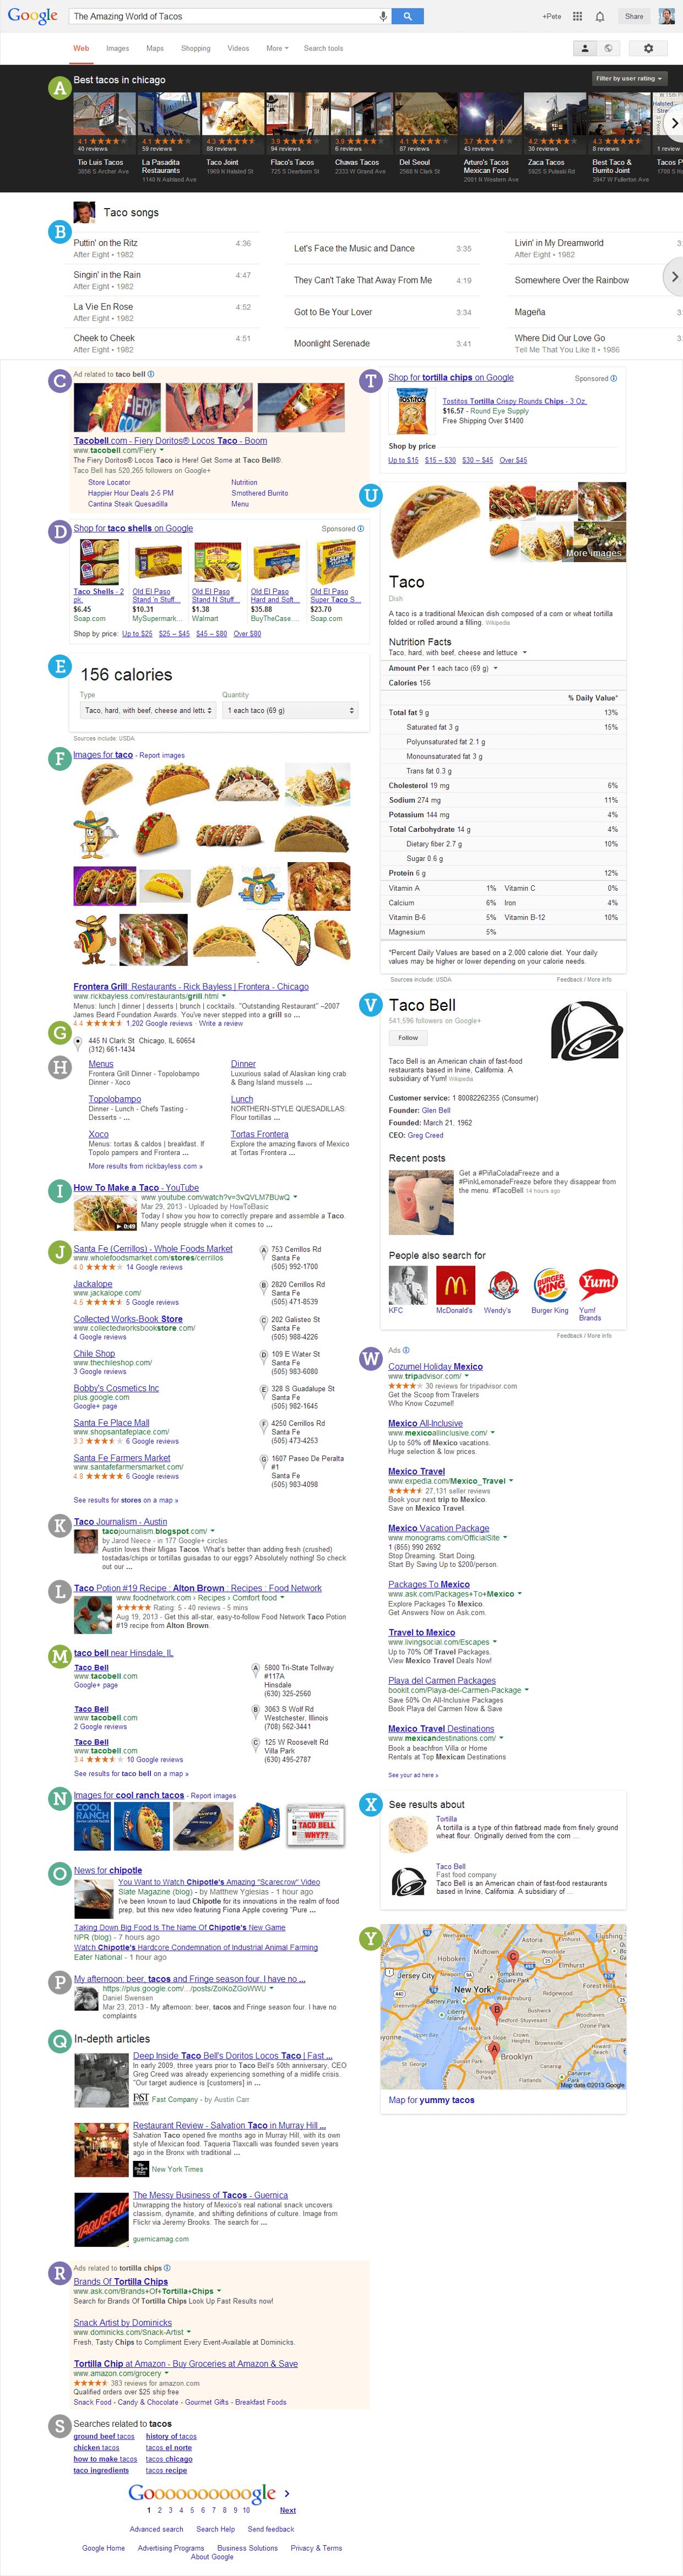 Google Search Engine results page